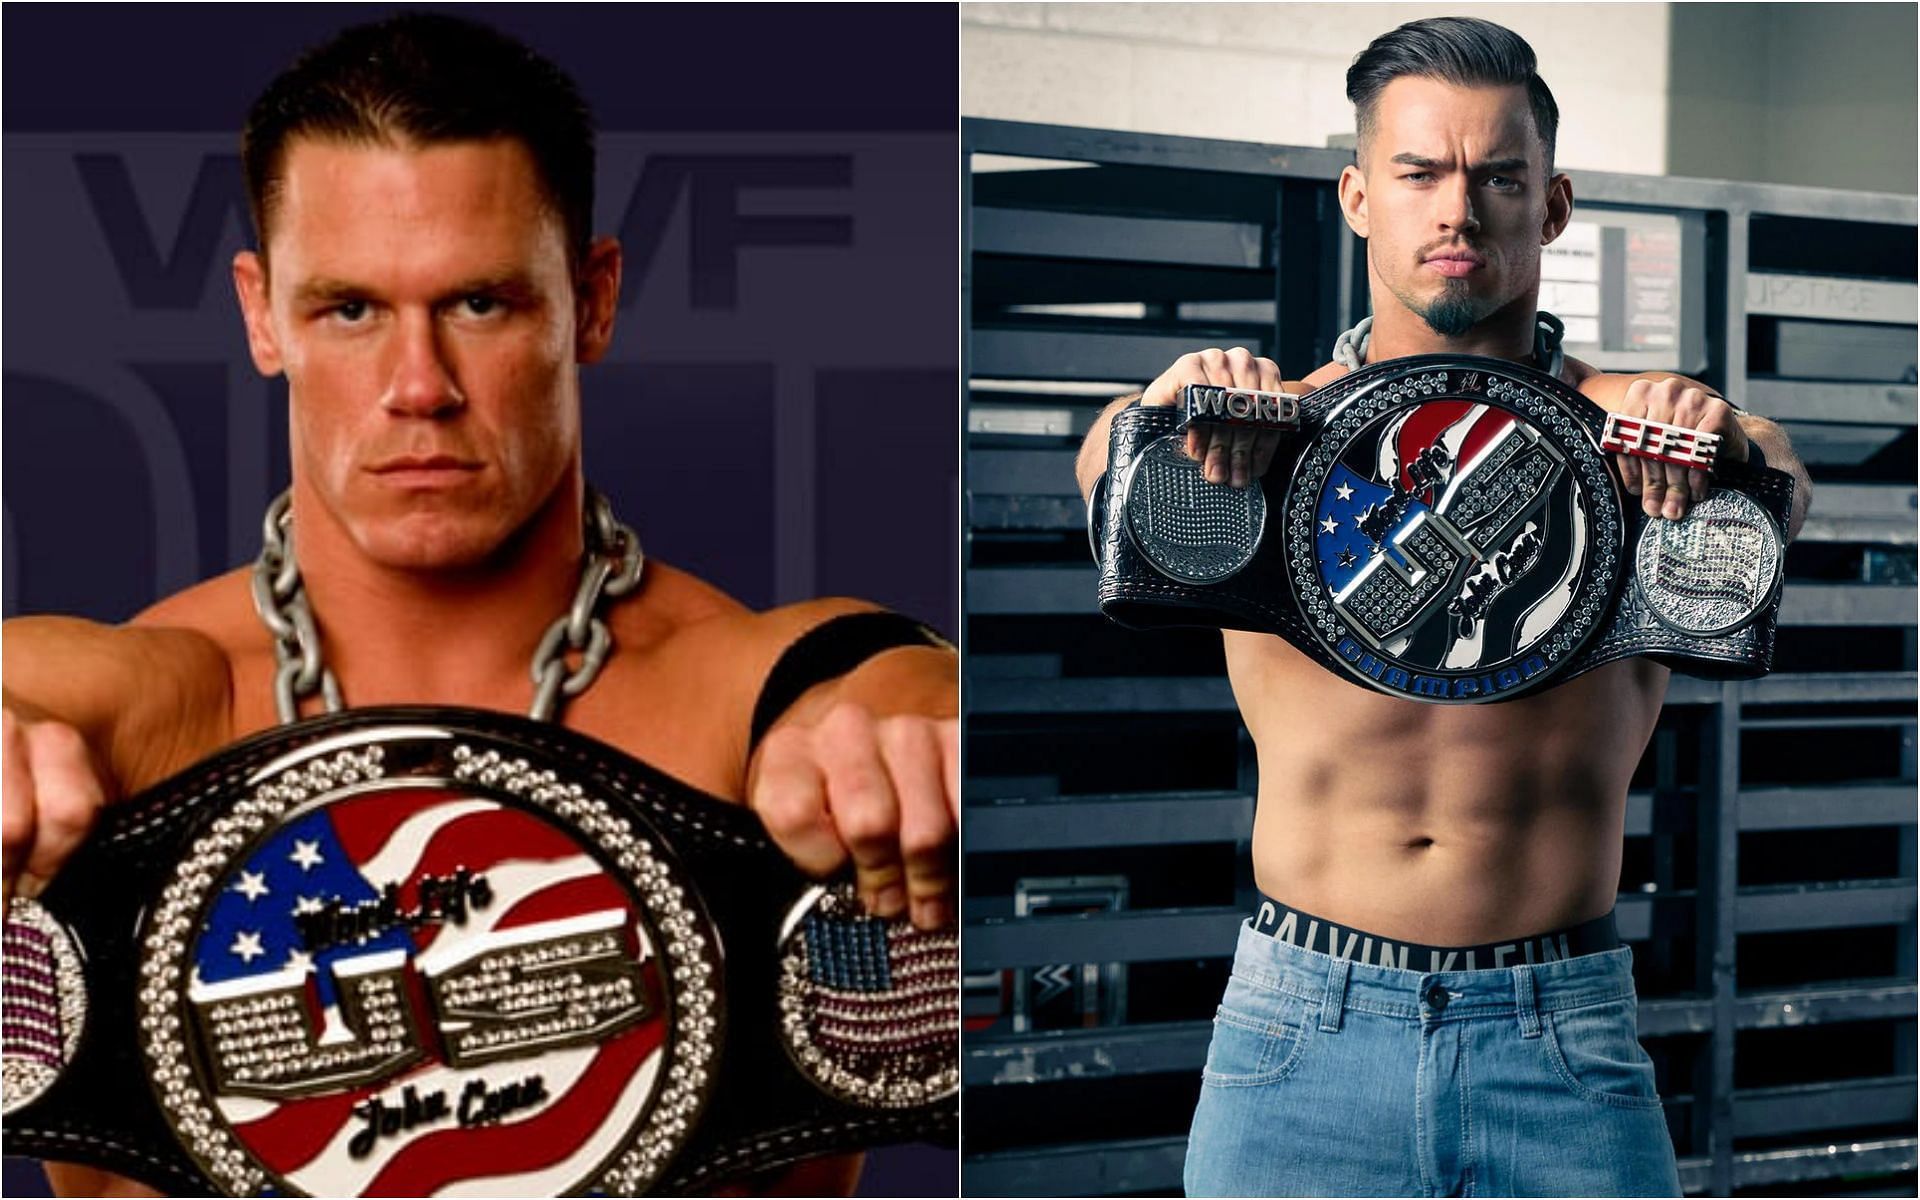 The similarities between Theory and Cena are uncanny